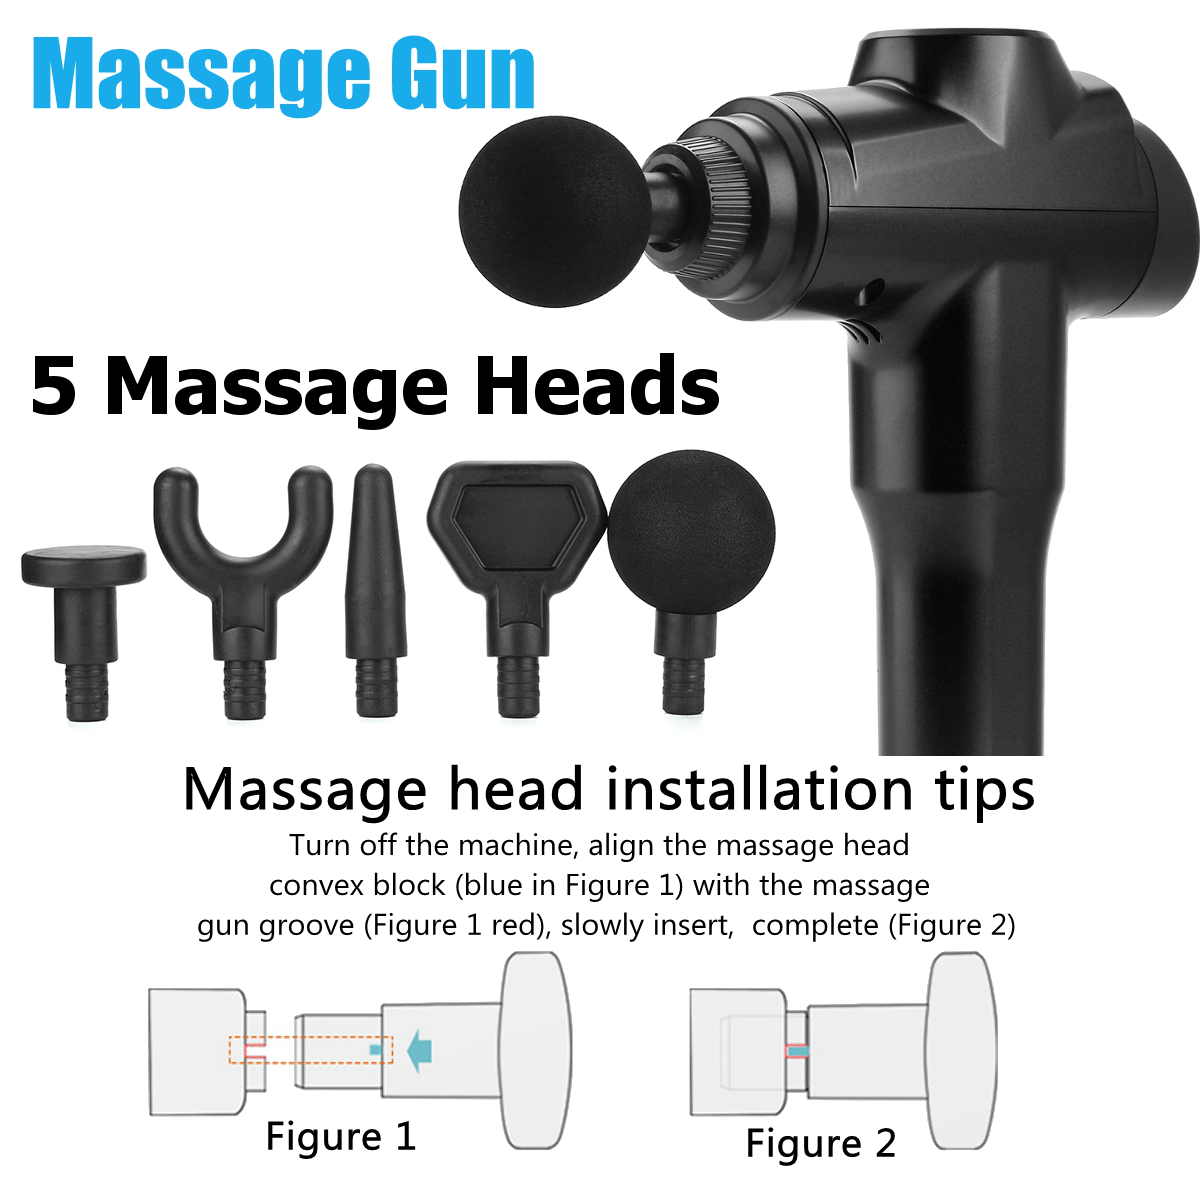 Recahrgable-6-Speed-5-Head-Fascia-Massager-Muscle-Relaxation-Massager-Gym-High-Frequency-Vibration-P-1679196-5